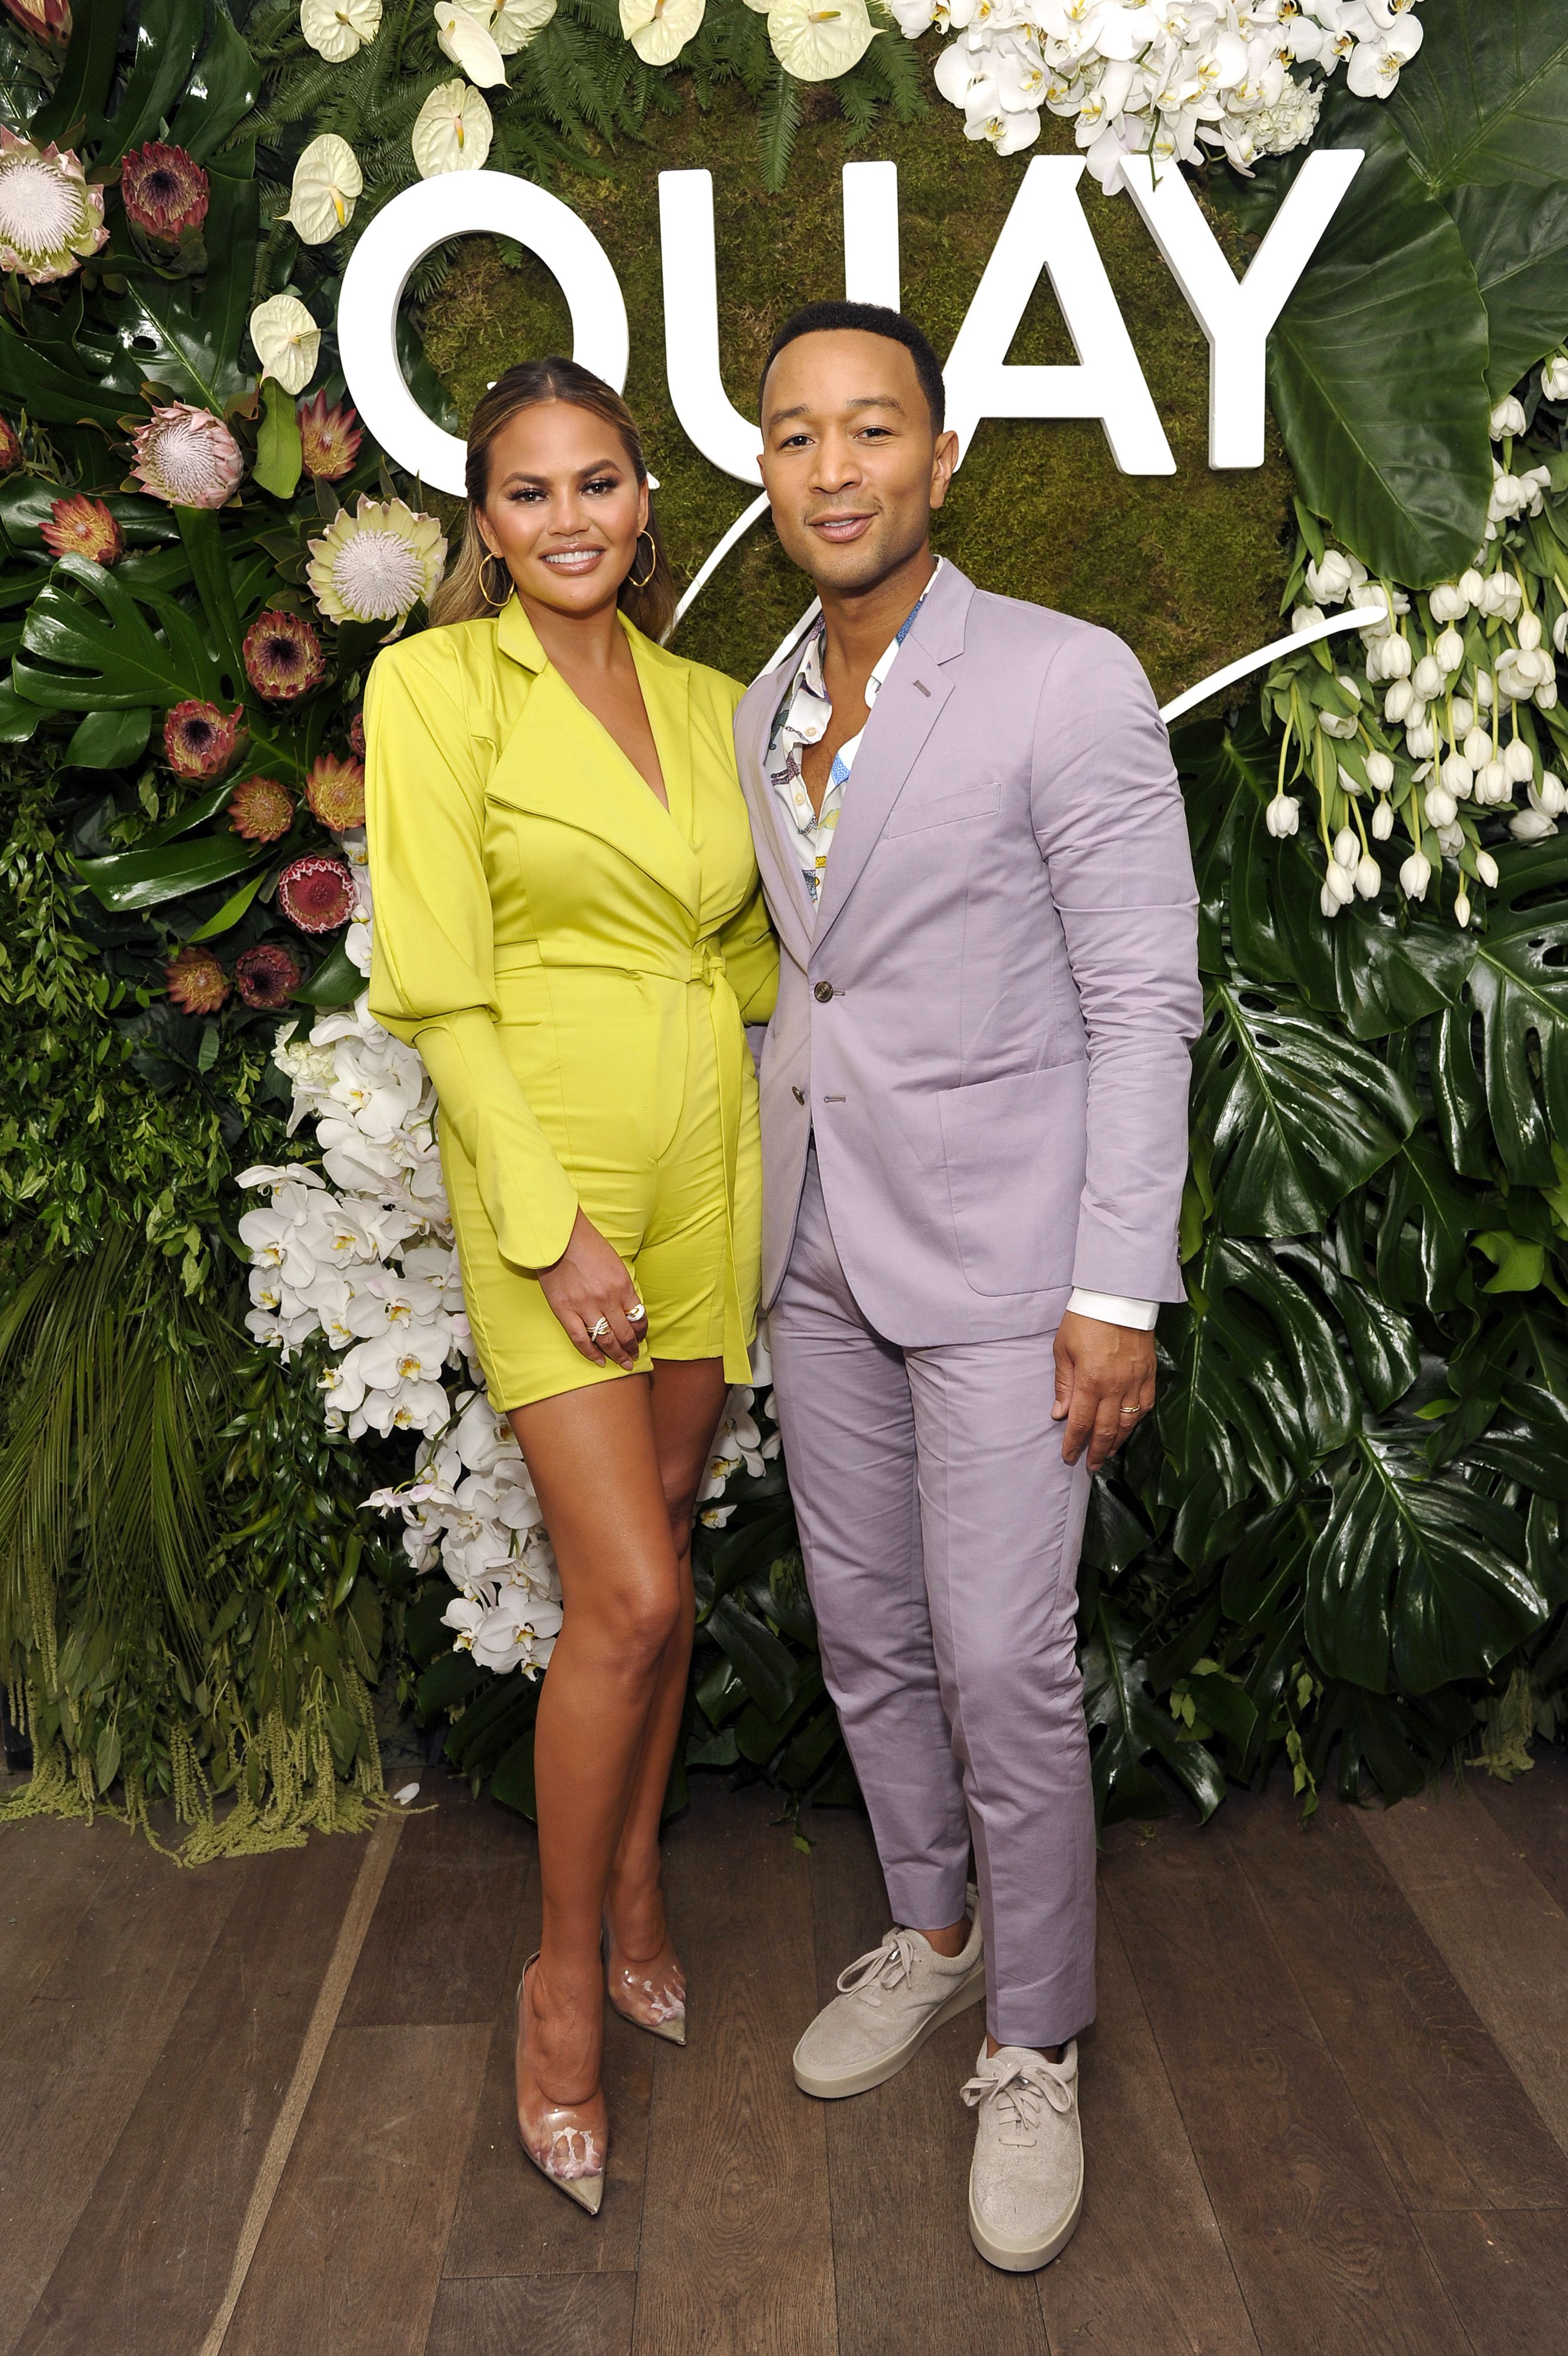 Chrissy Teigen returns to Instagram with lengthy apology